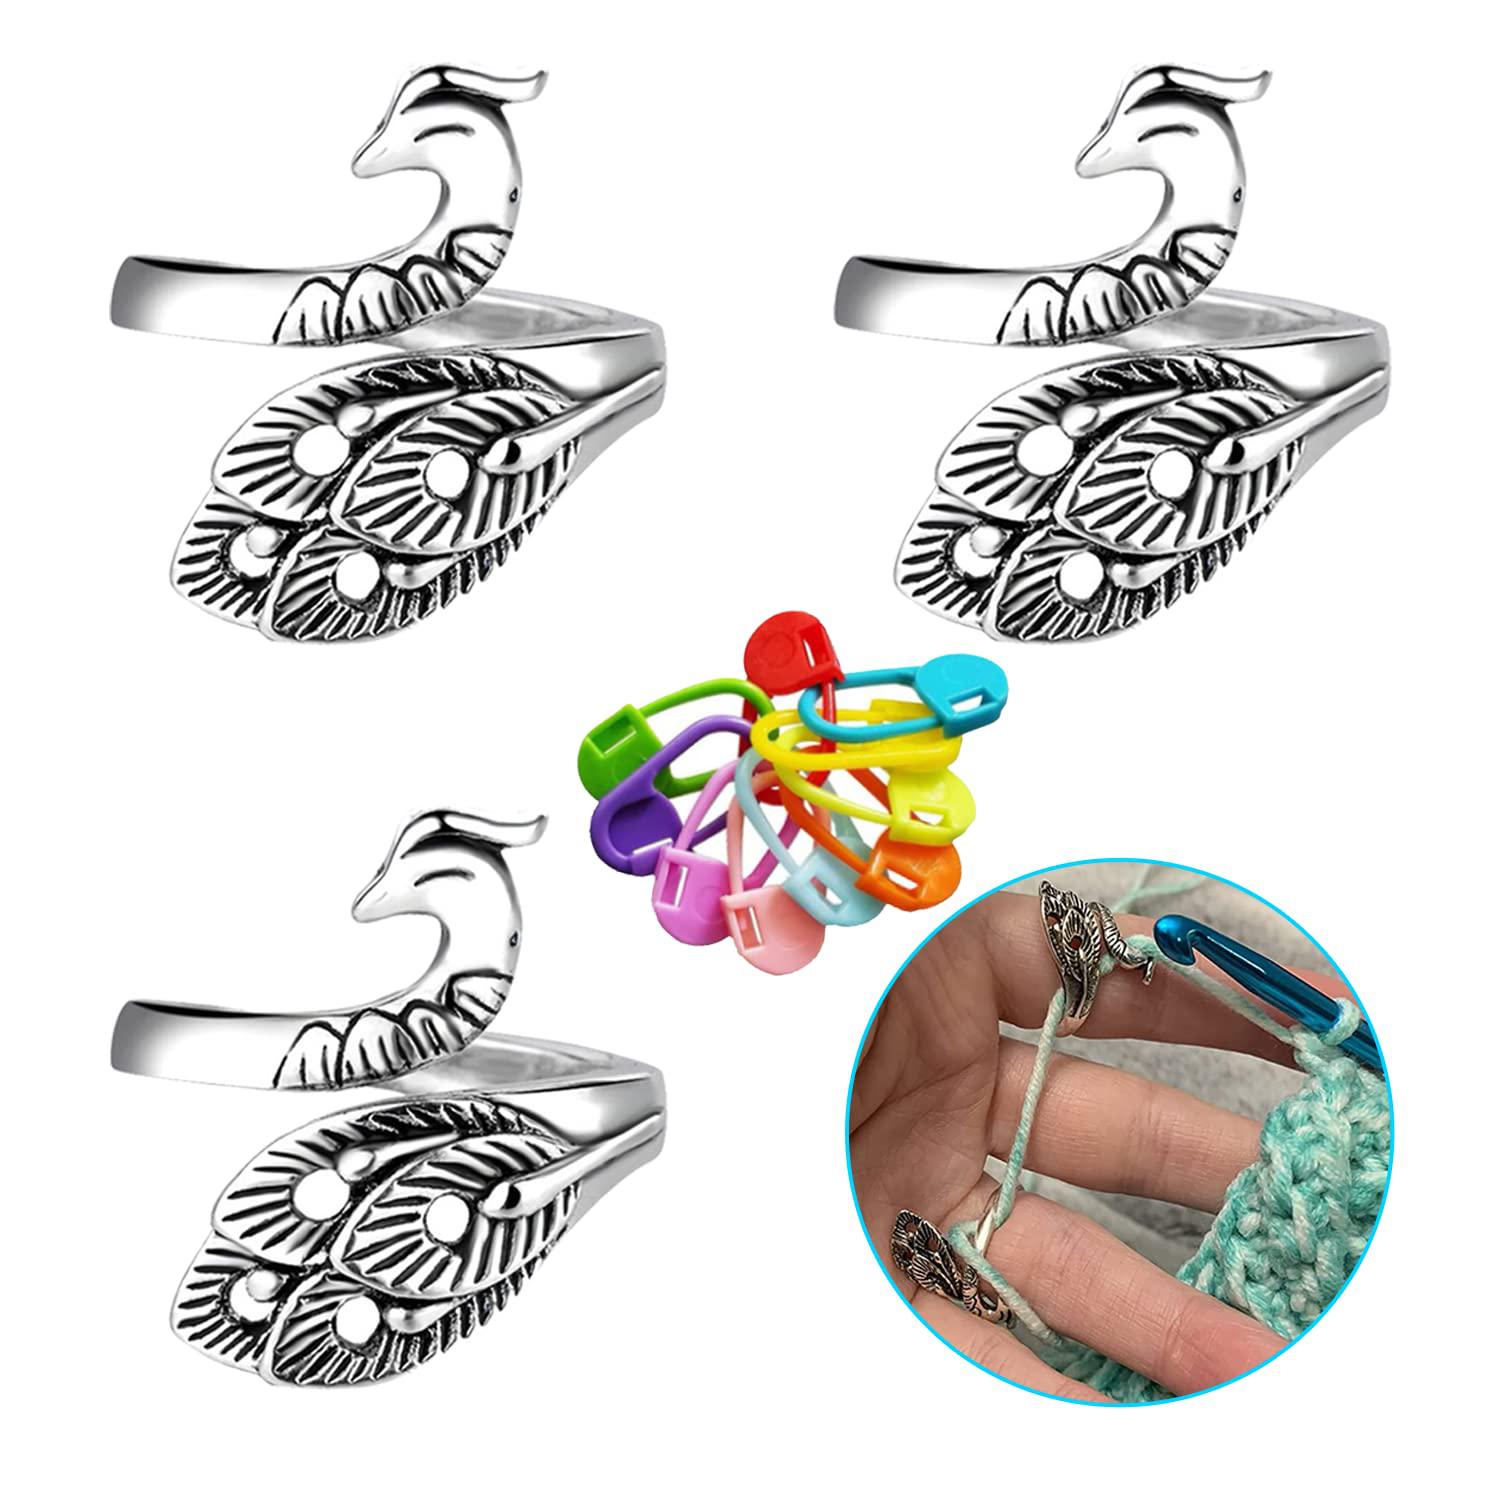 Gozadera upgraded 3 pcs crochet ring for finger yarn guide, adjustable tension  ring for crocheting, finger pain release and faster kni